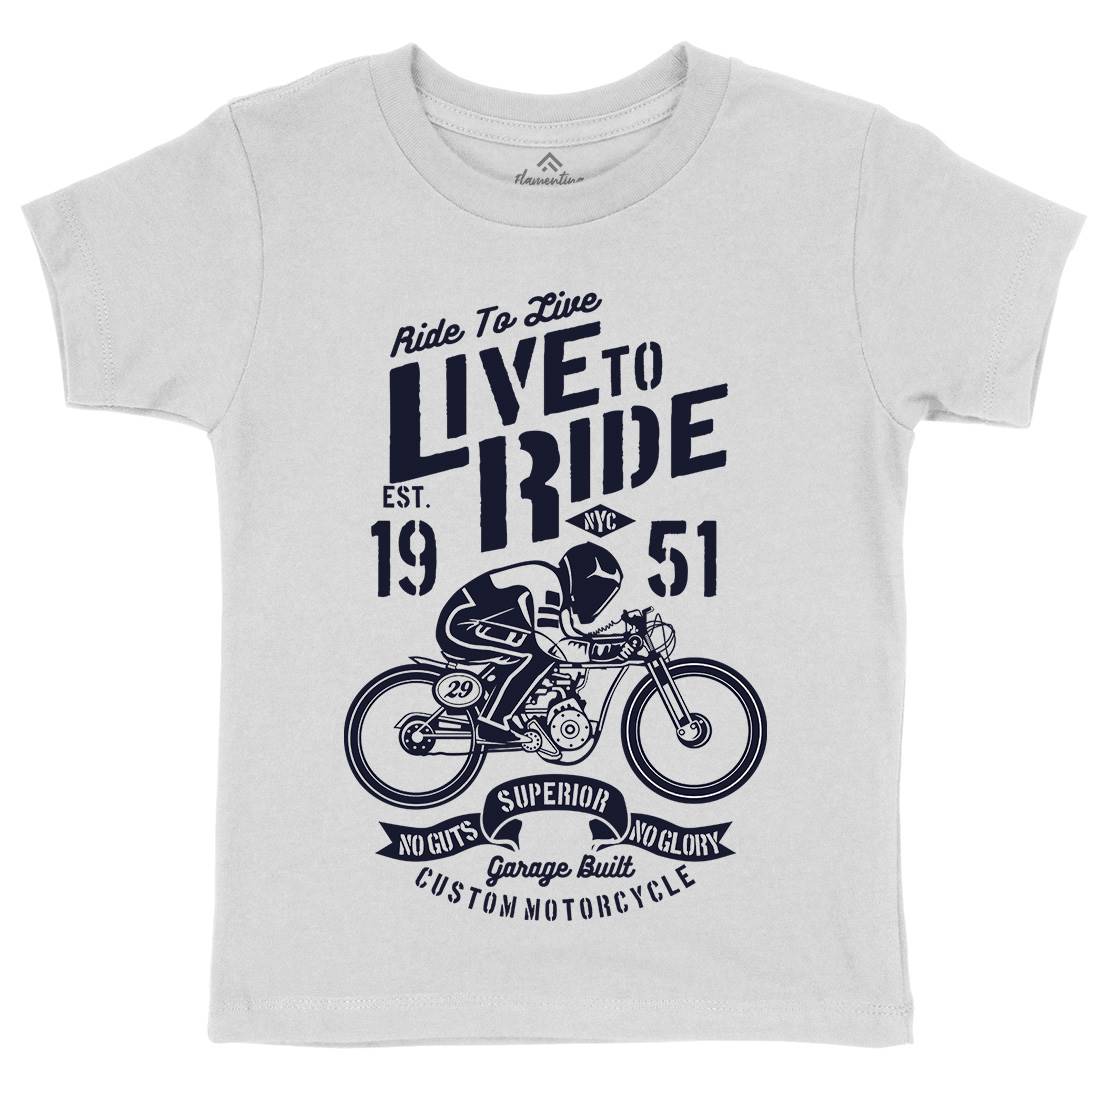 Live To Ride Kids Crew Neck T-Shirt Motorcycles B227